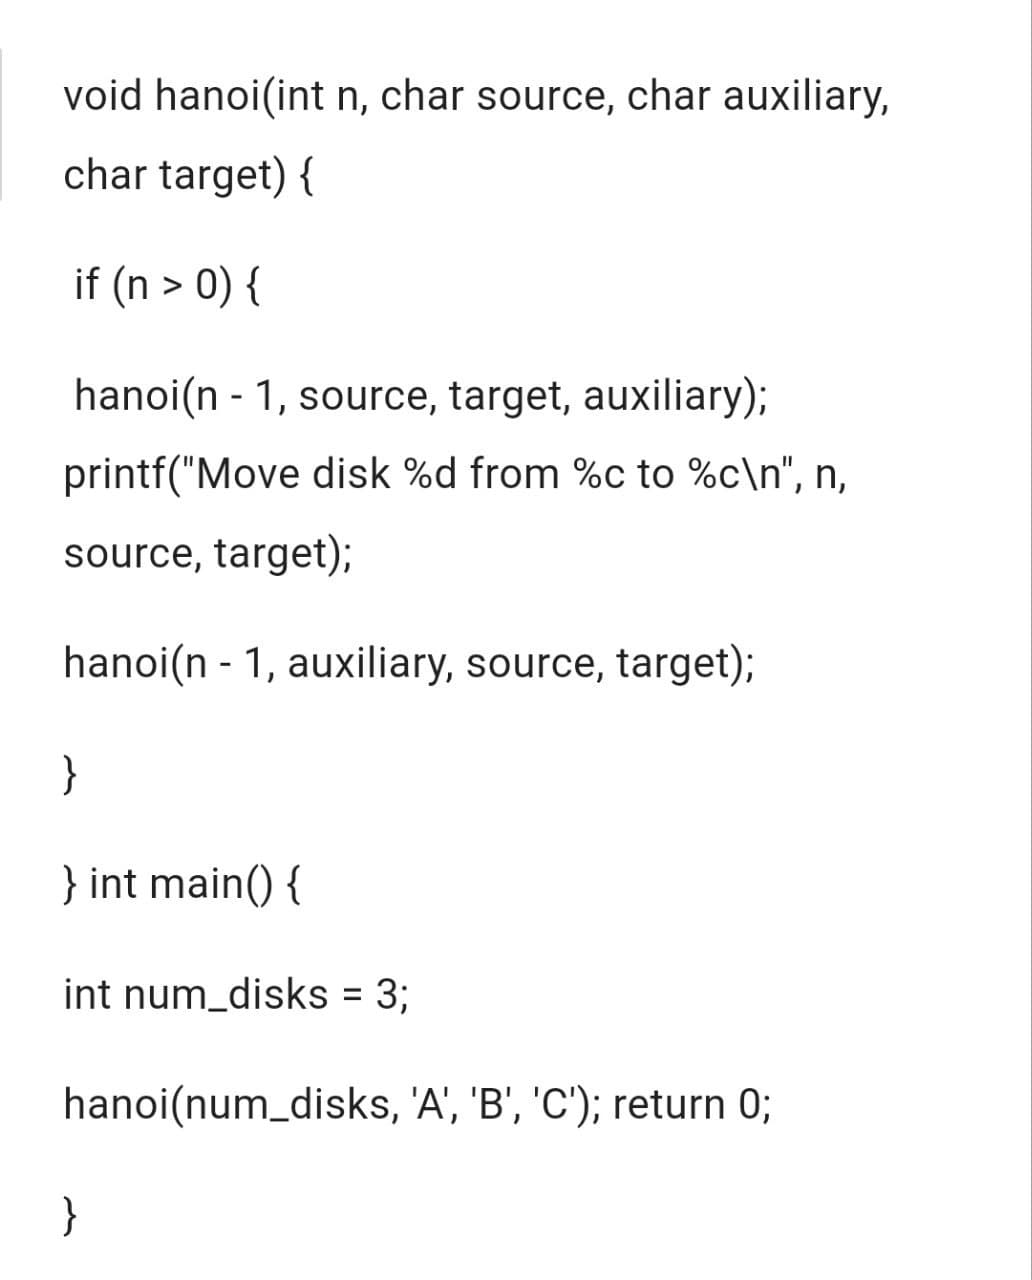 void hanoi(int n, char source, char auxiliary,
char target) {
if (n > 0) {
hanoi(n-1, source, target, auxiliary);
printf("Move disk %d from %c to %c\n", n,
source, target);
hanoi(n-1, auxiliary, source, target);
}
} int main() {
int num_disks = 3;
hanoi (num_disks, 'A', 'B', 'C'); return 0;
}